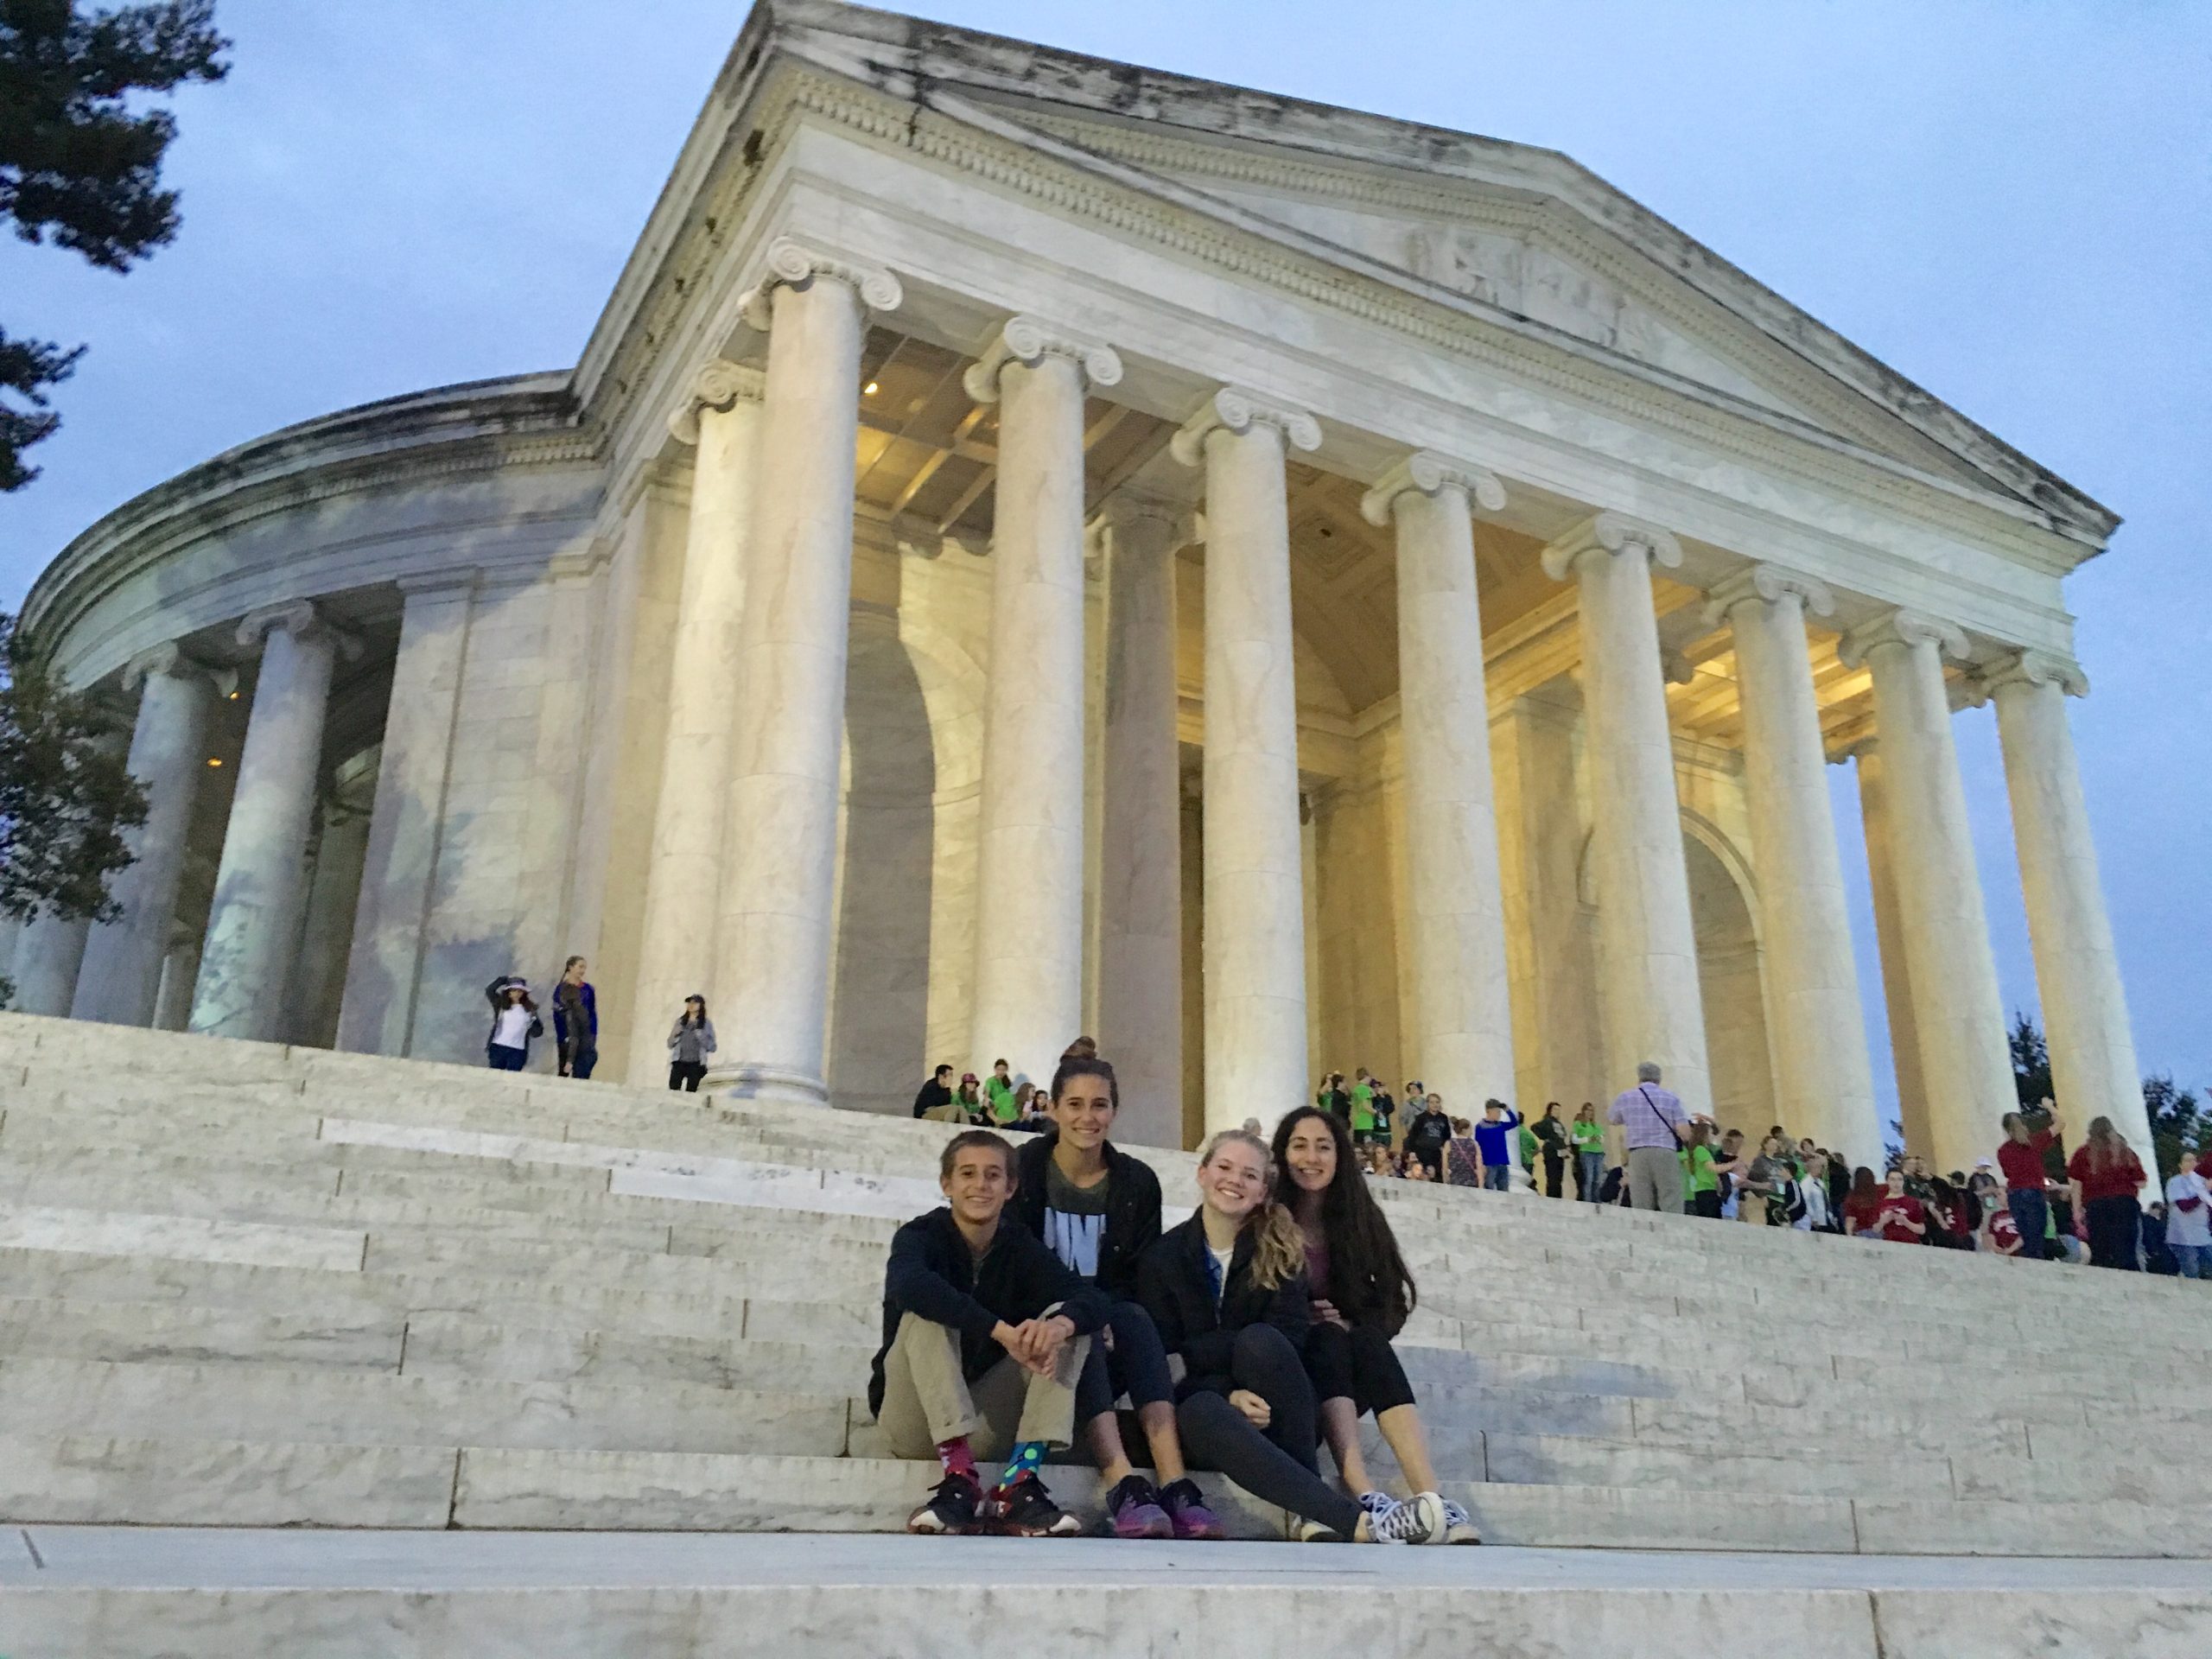 Students posing on steps at Jefferson Memorial in Washington DC